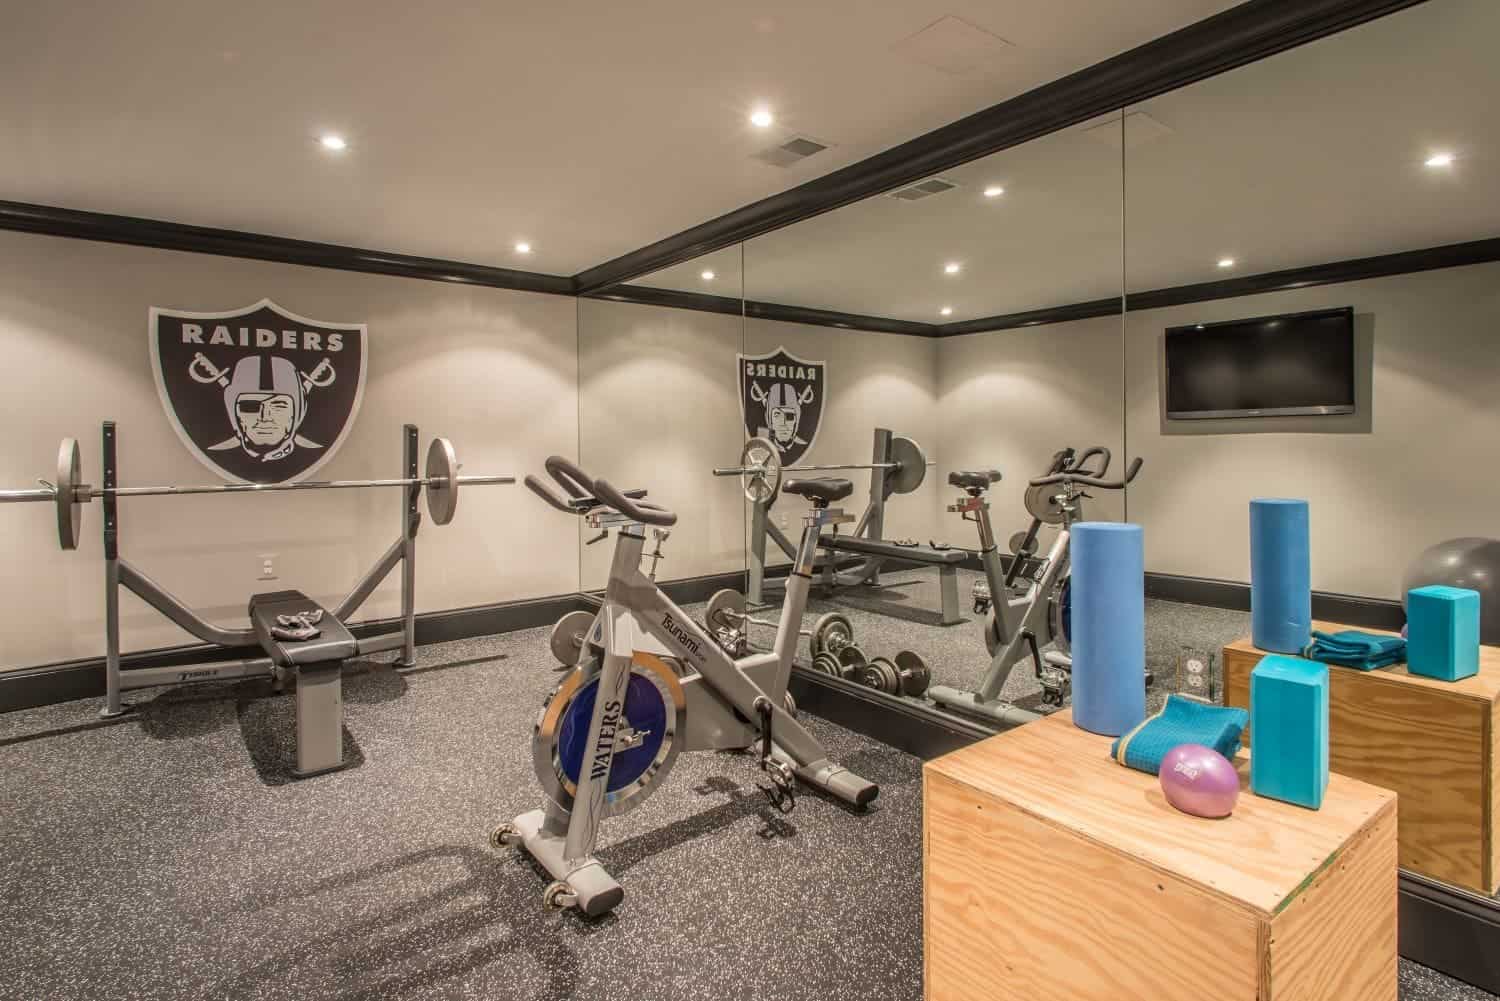 Exercise Room in Basement Remodel Project with Floor to Ceiling Mirrors _ Denny + Gardner Basement Remodeling Services small